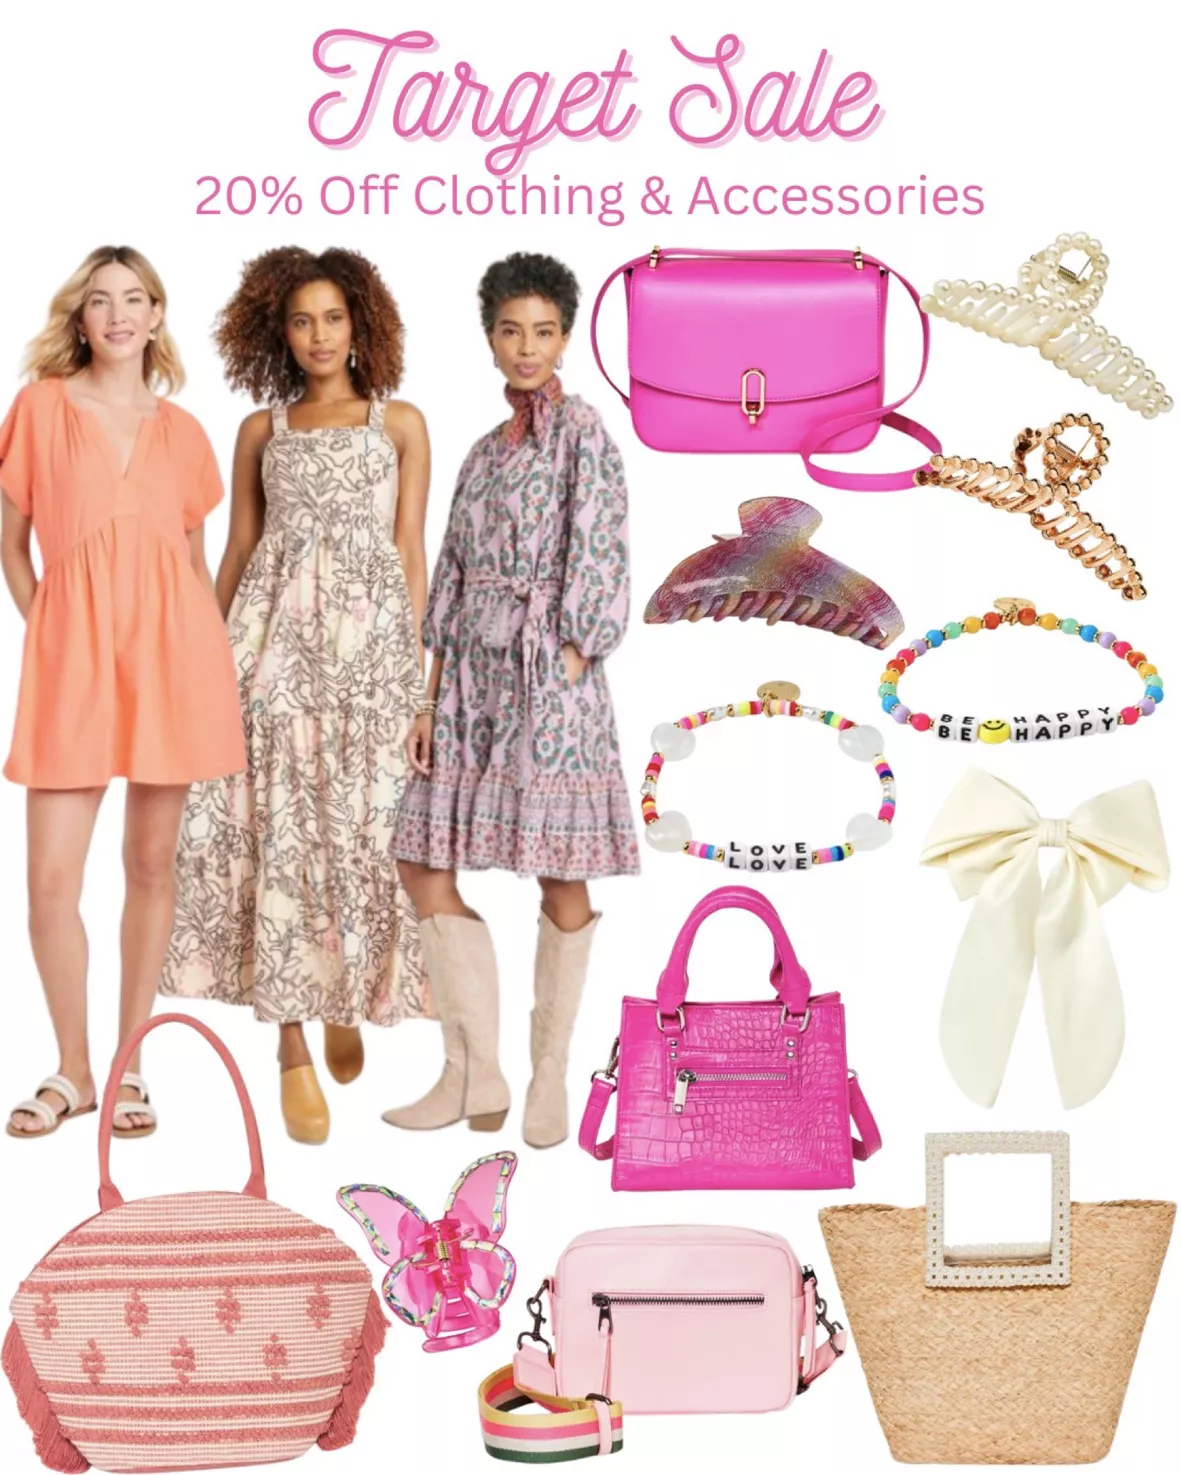 Clearance Sale, Women's Clothes & Accessories